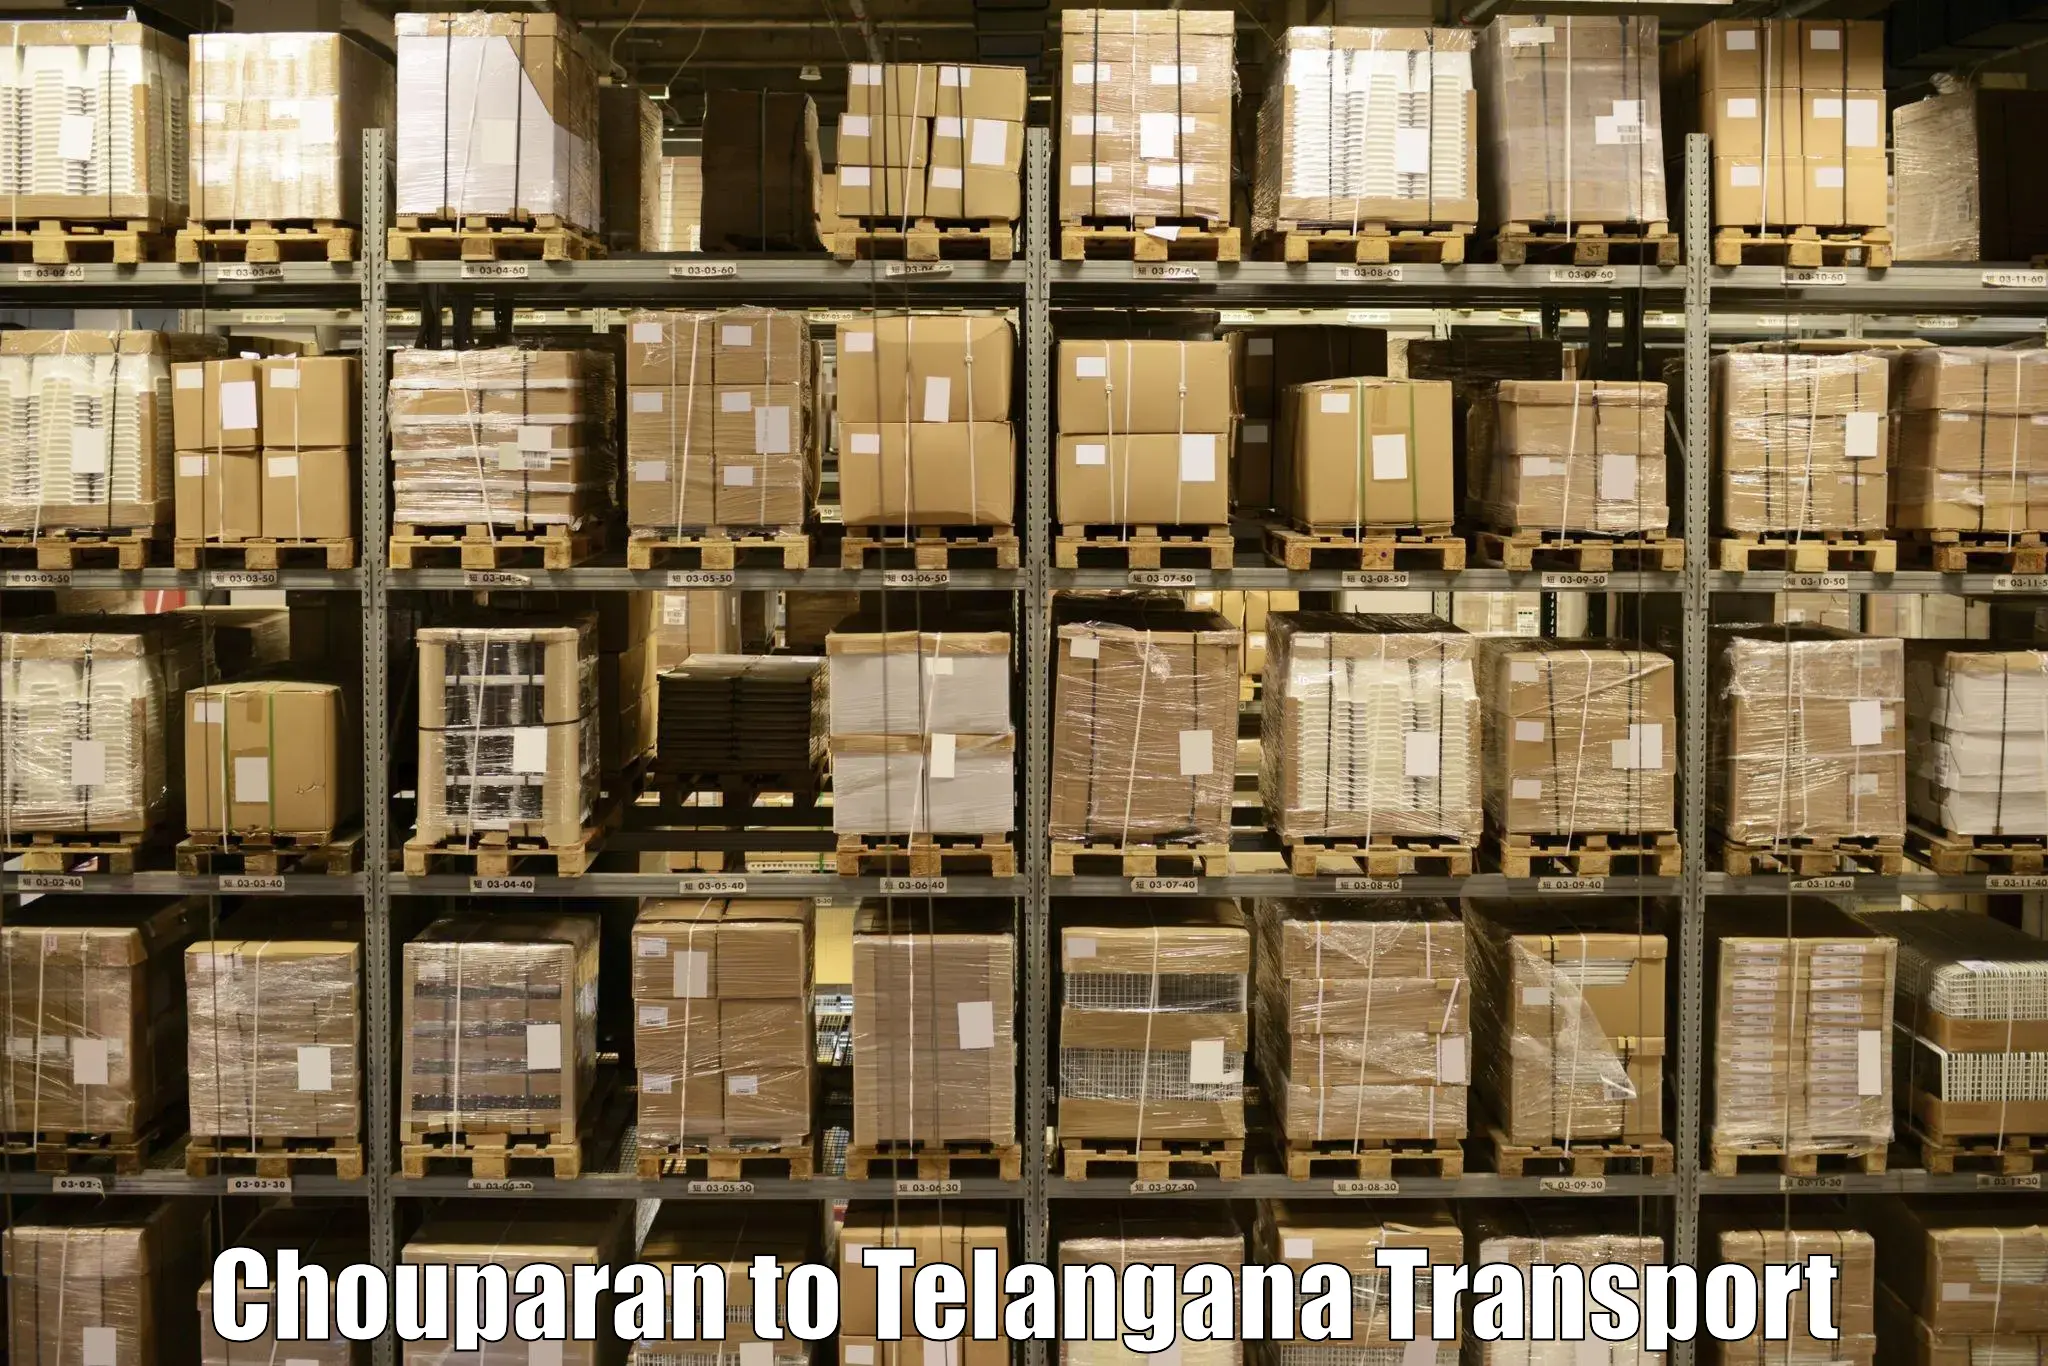 Parcel transport services in Chouparan to Gangadhara